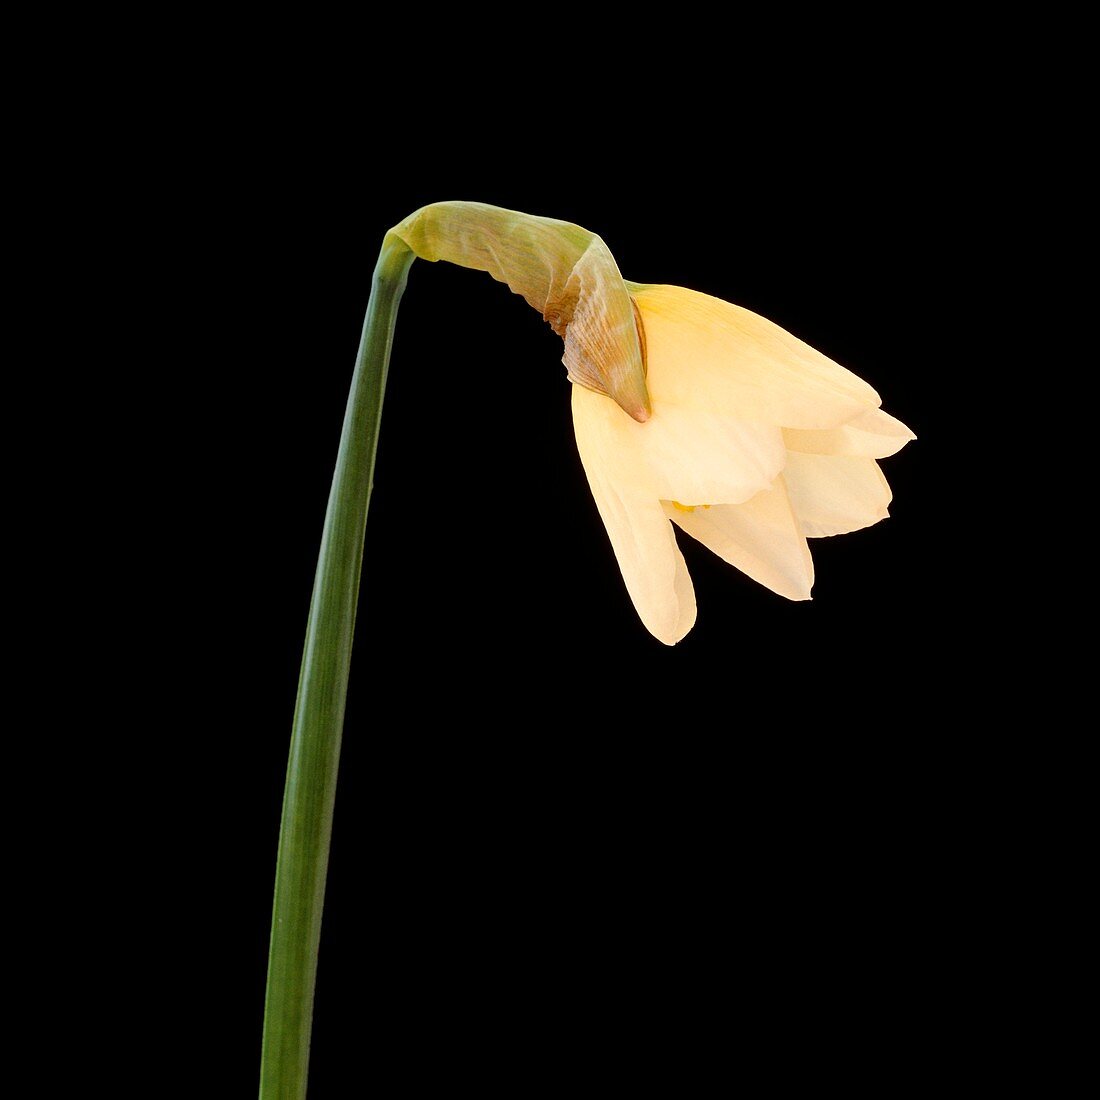 Daffodil flower opening (3 of 6)